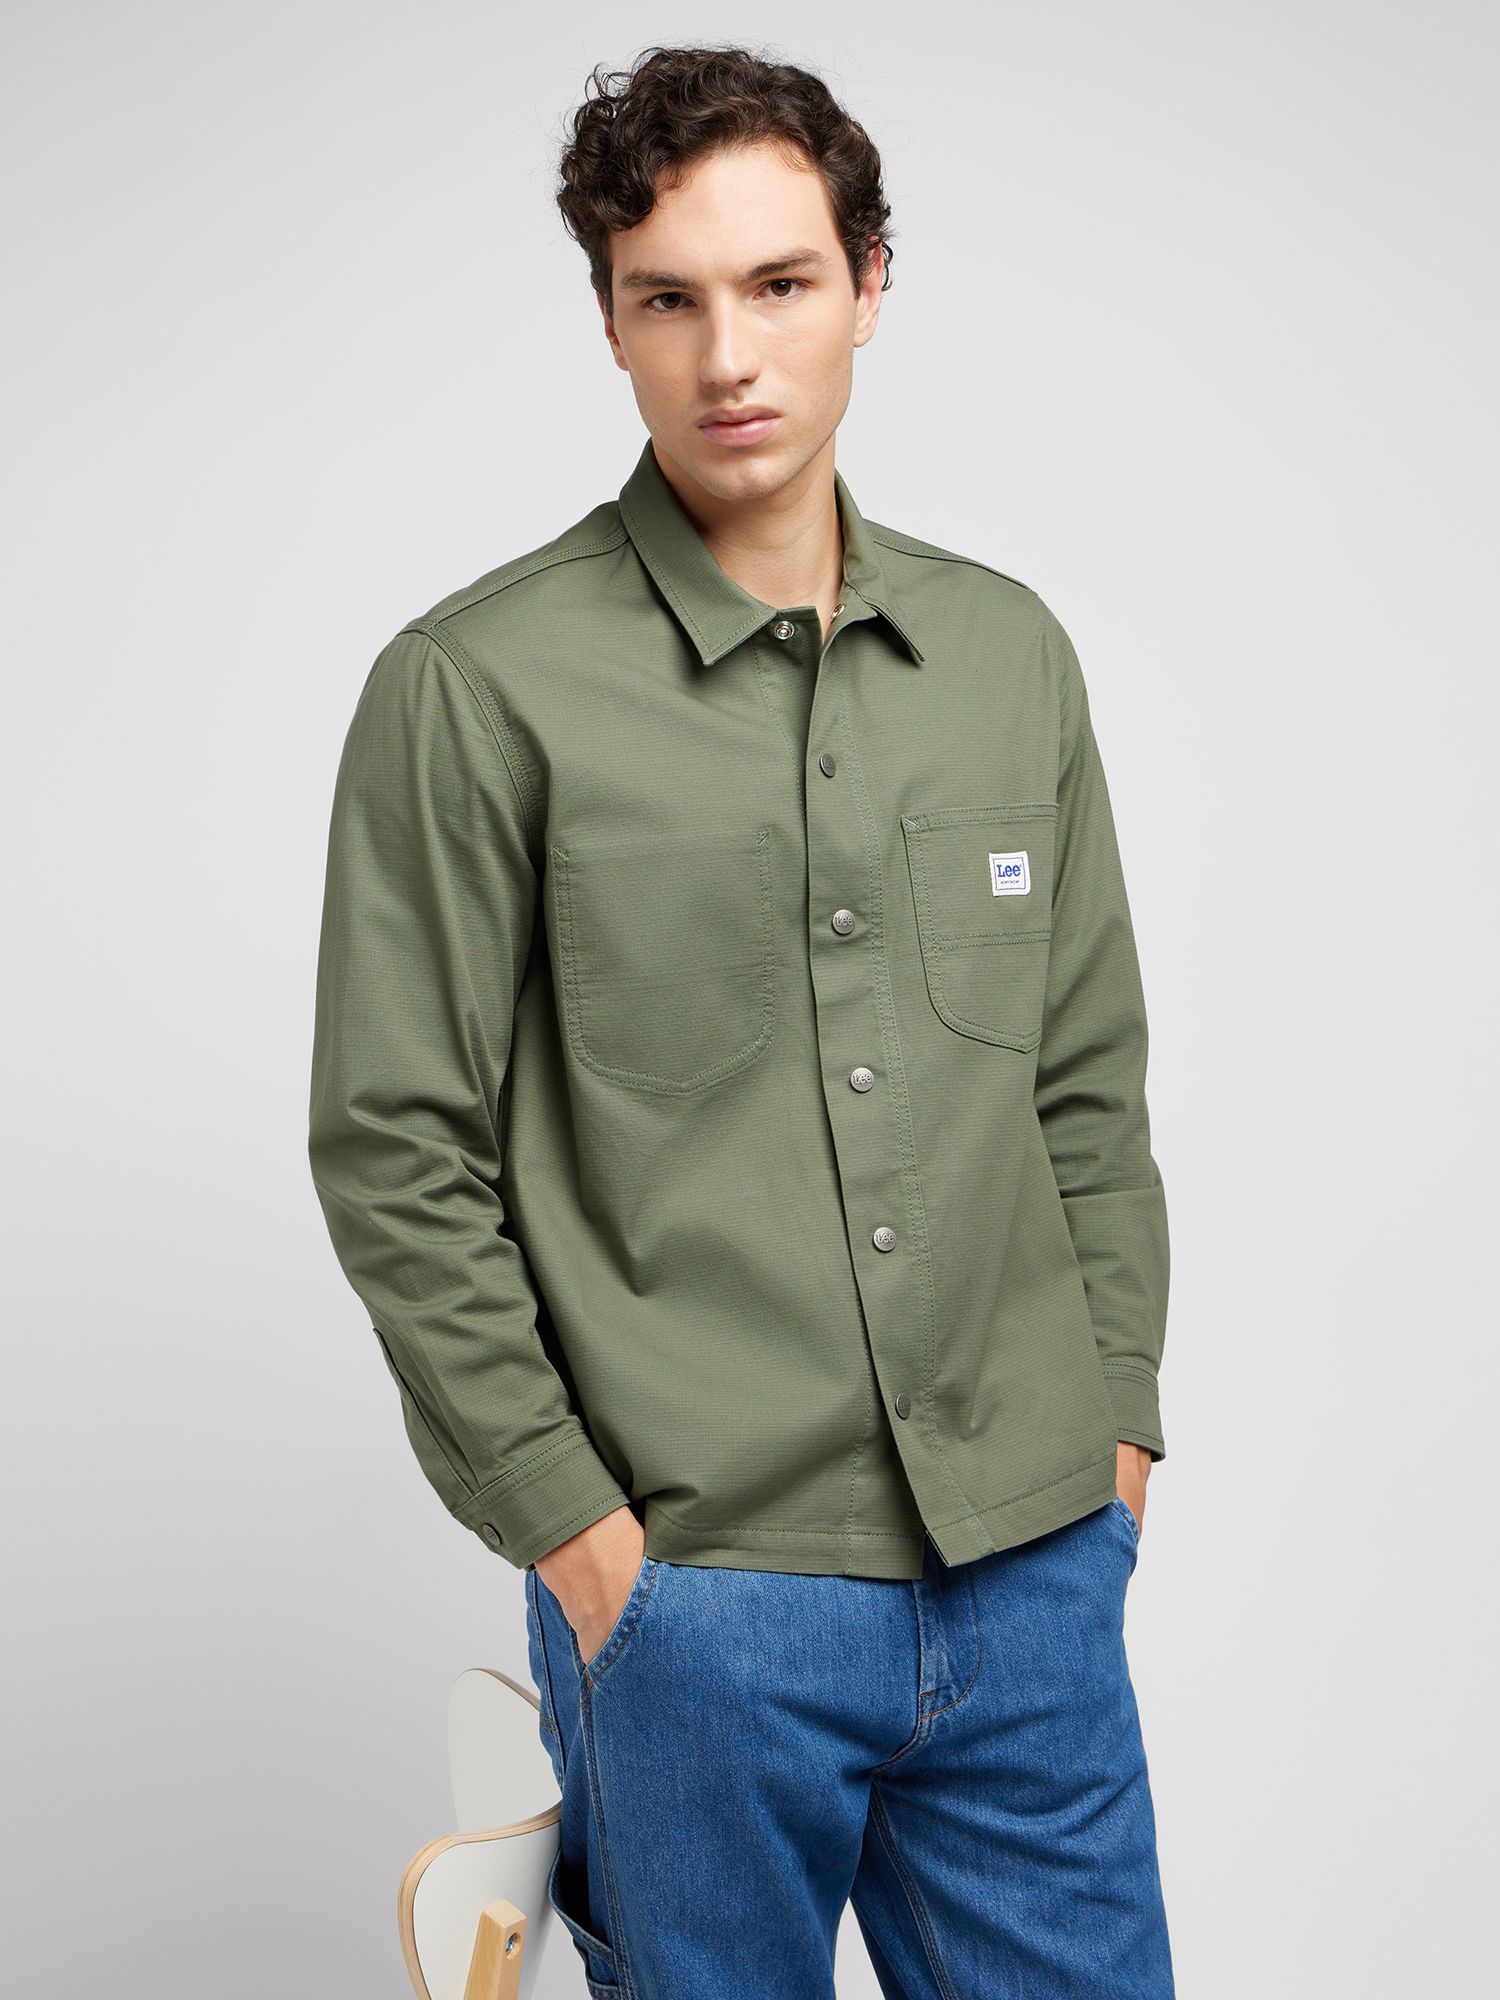 Lee Worker Relaxed Overshirt, Olive, XL